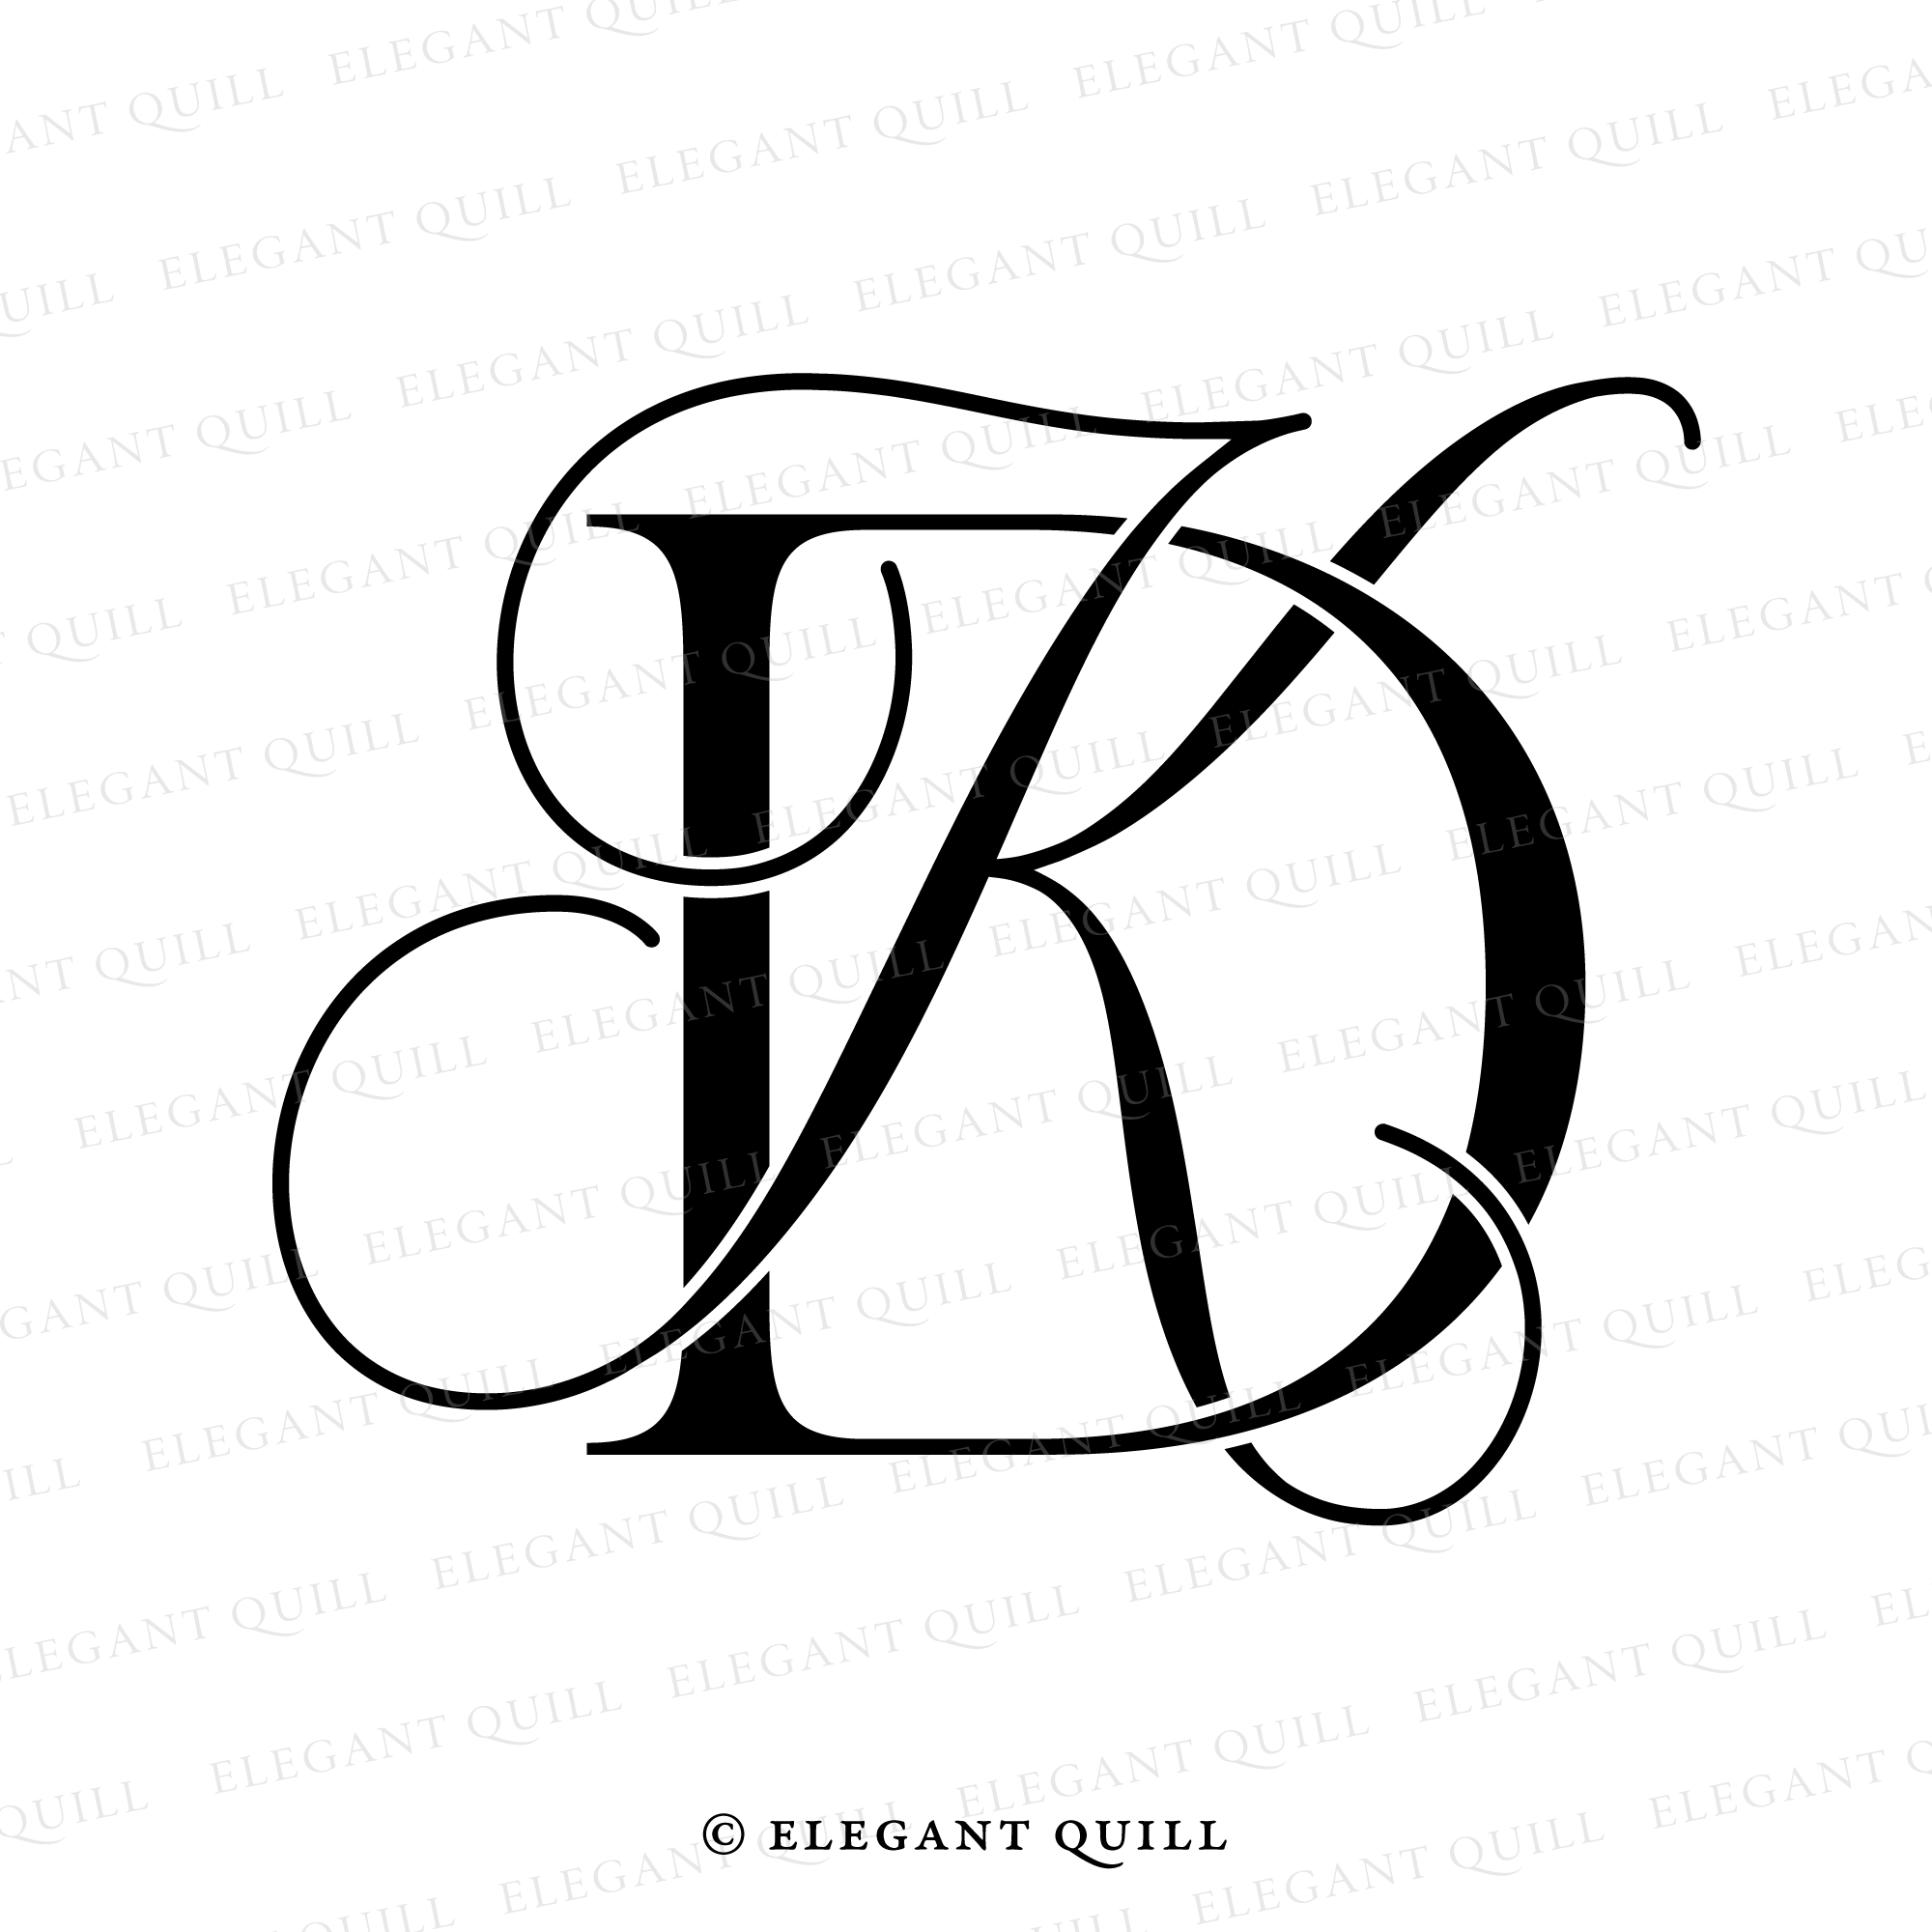 Kd tech logo Cut Out Stock Images & Pictures - Alamy